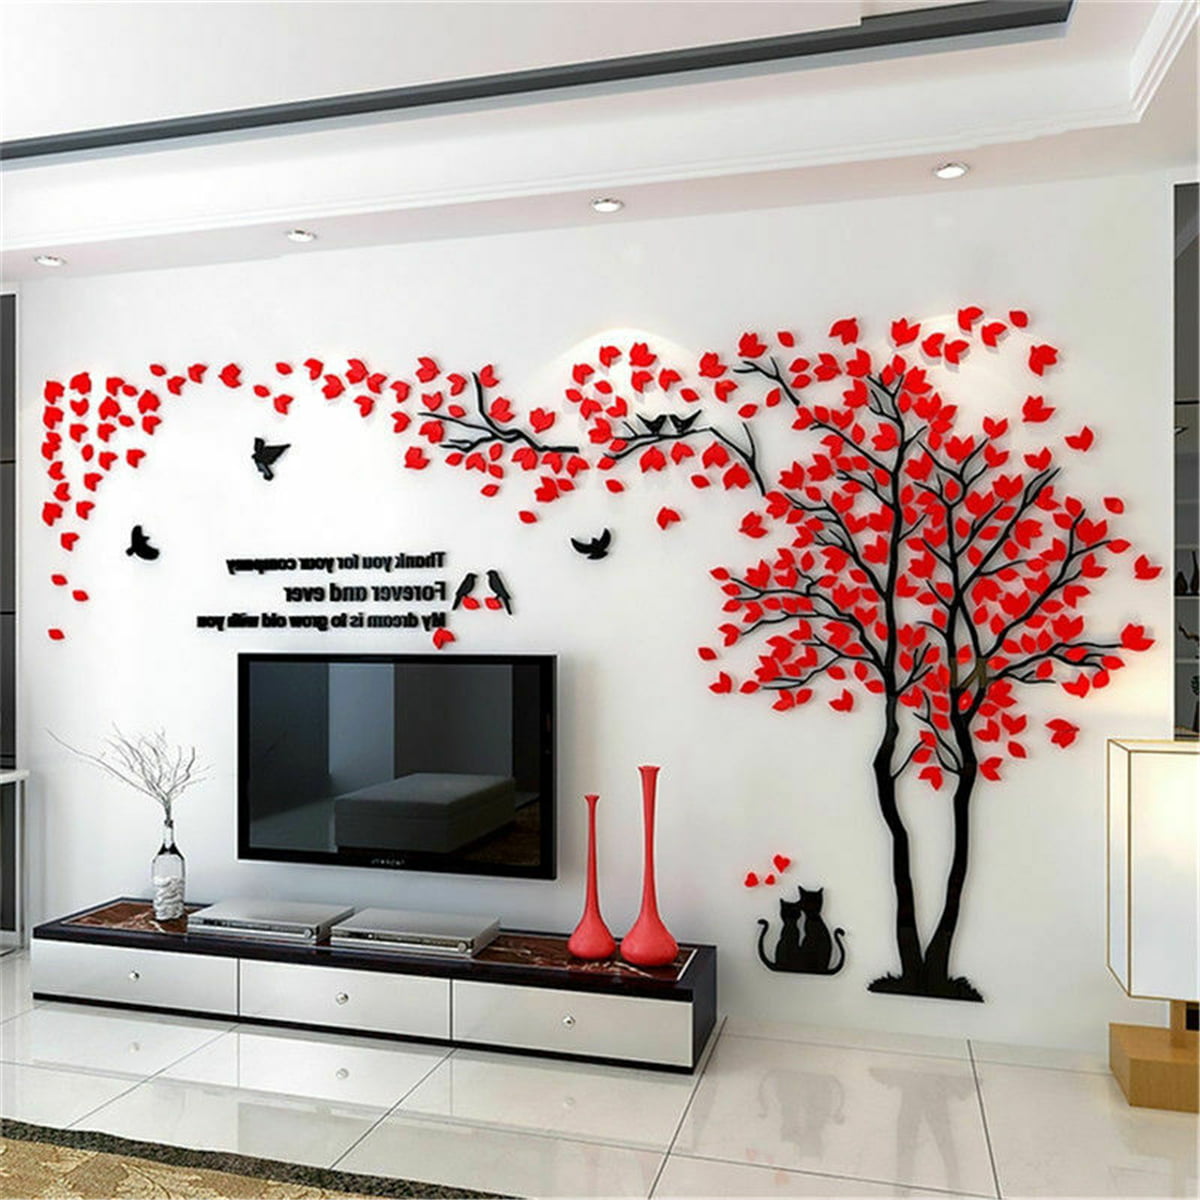 3D Large Tree Arcylic Wall Sticker Room Decal Mural Art DIY Home TV Wall Decor H 